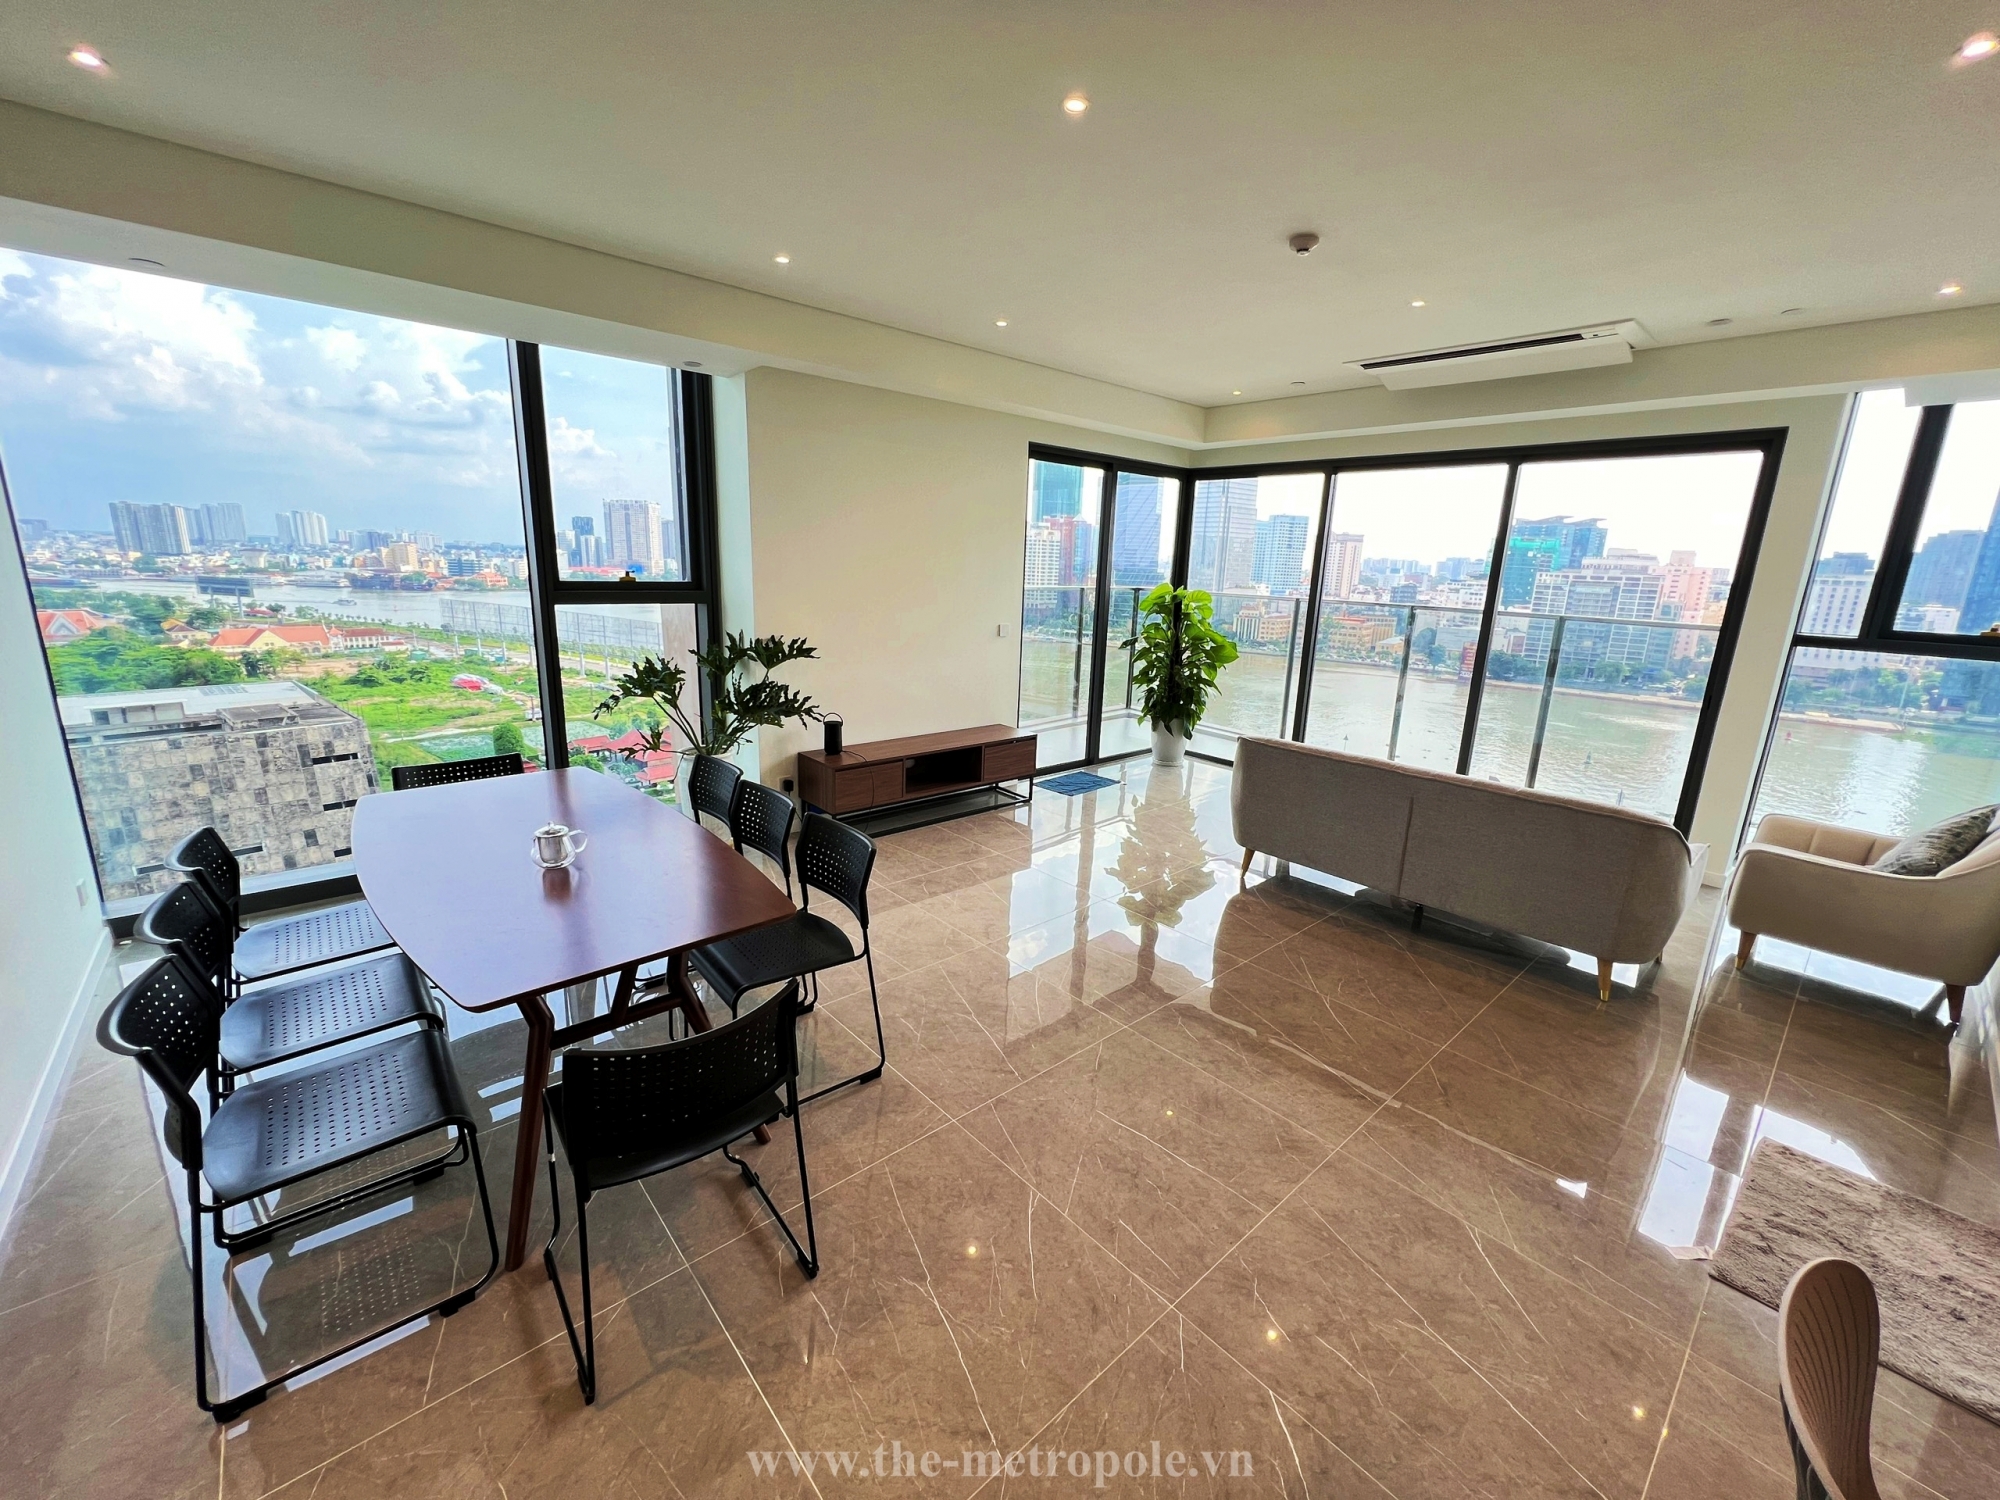 Fully-furnished 4 bedroom apartment for rent in The Opera Residence with river view